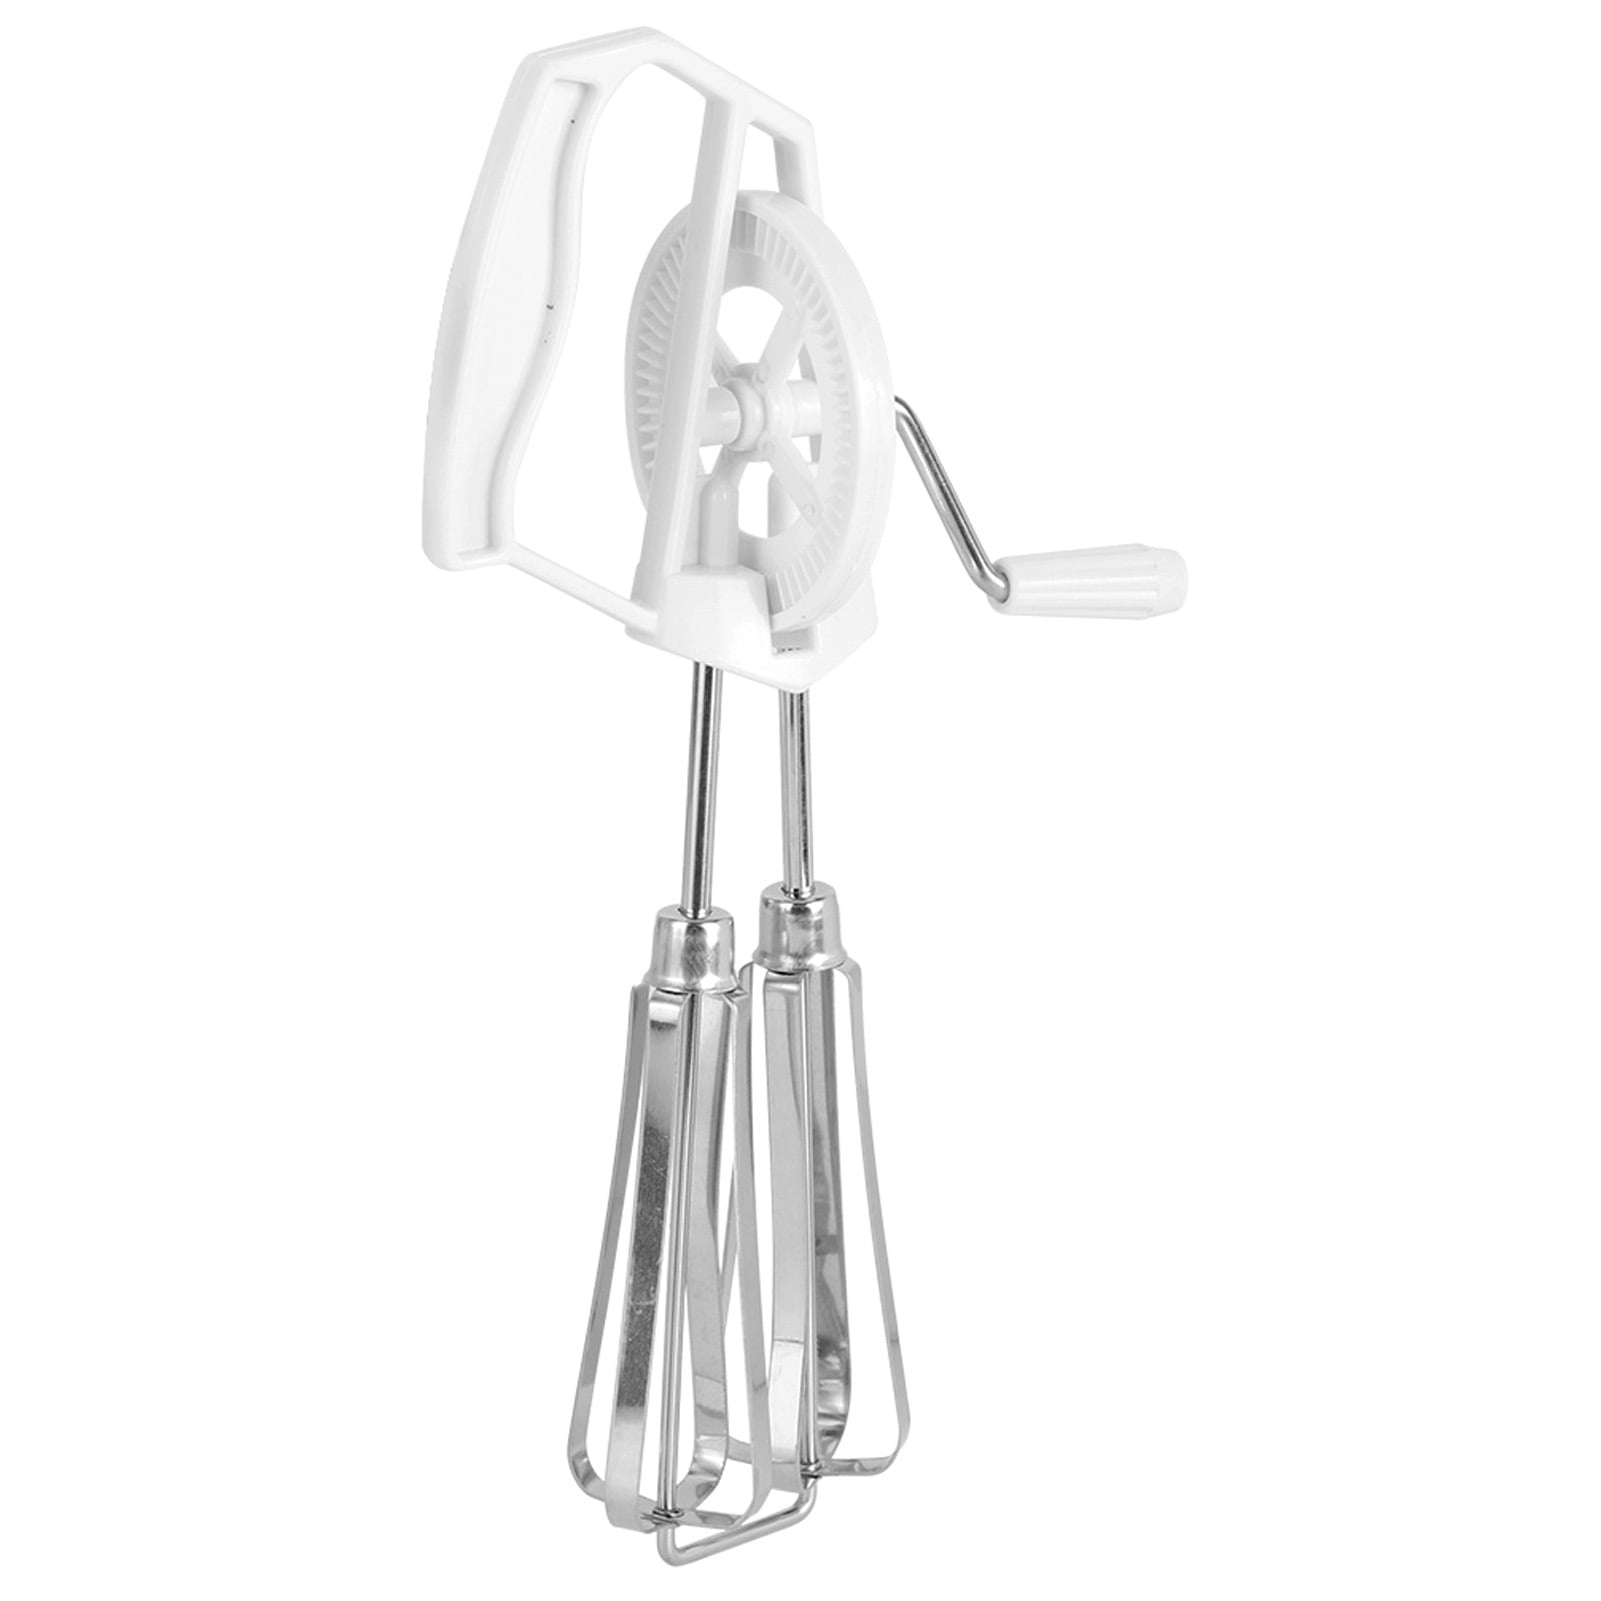 Manual Hand Mixer Hand Crank Stainless Steel For Home White,Orange 